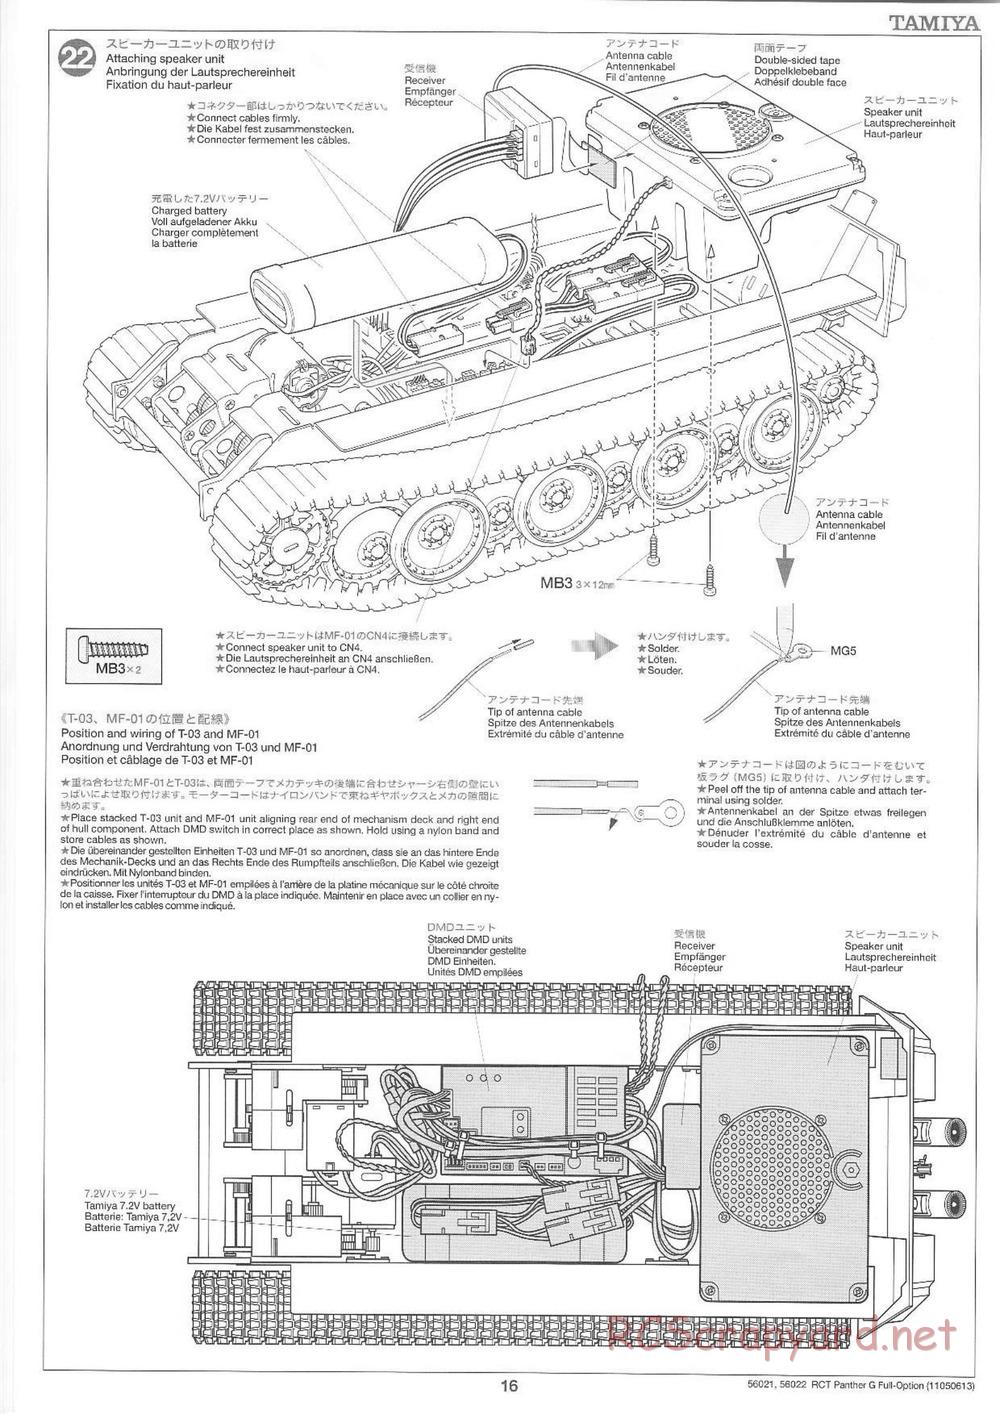 Tamiya - Panther Type G - 1/16 Scale Chassis - Manual - Page 16